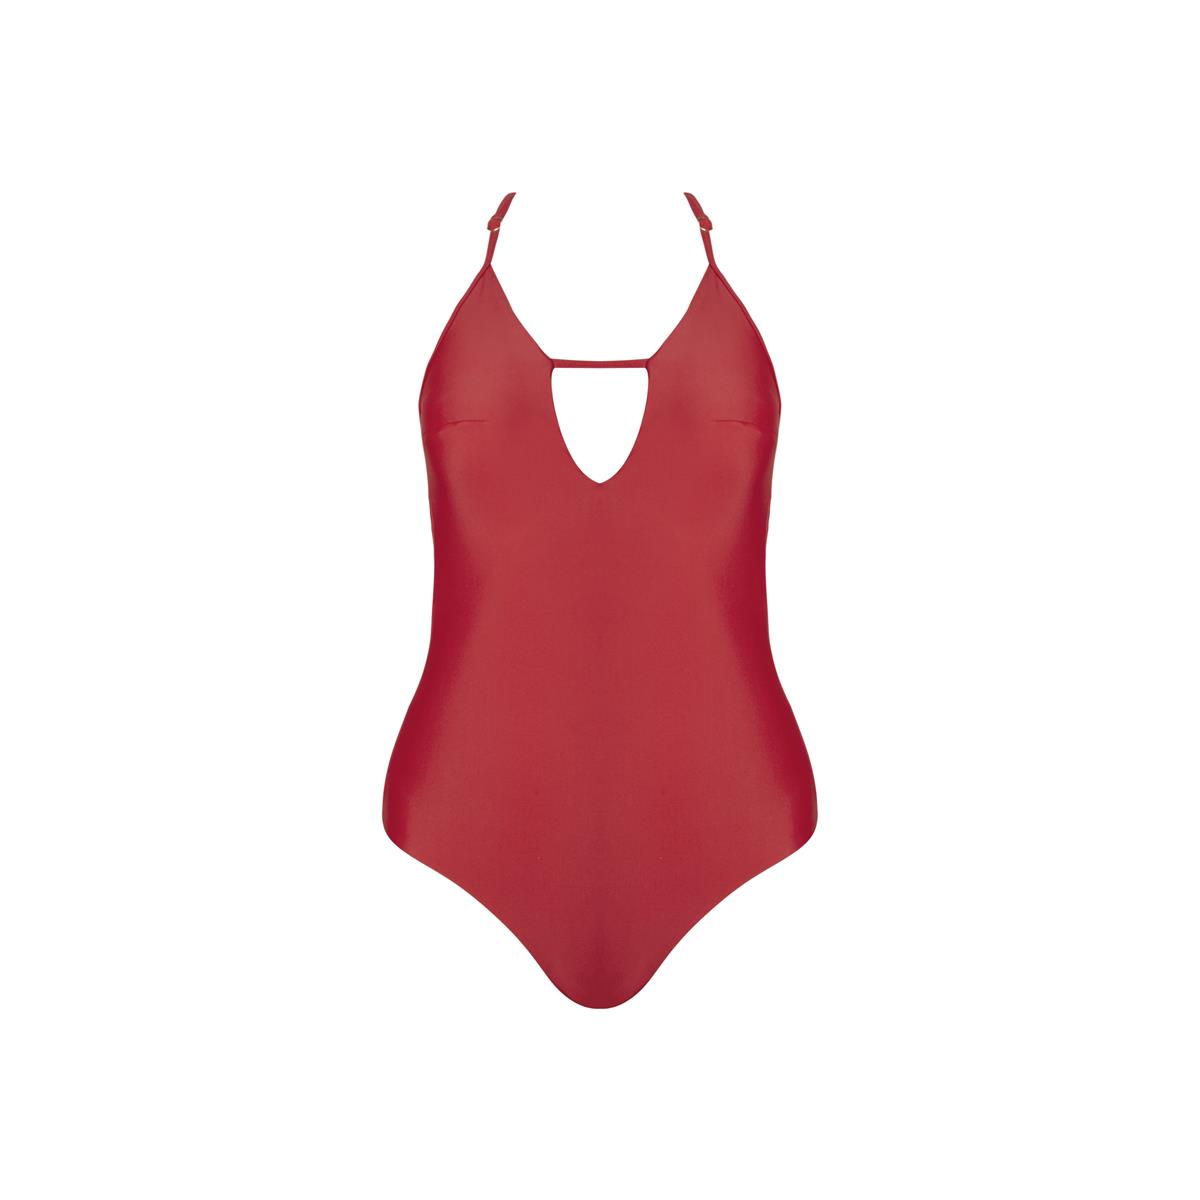 MARGARET AND HERMIONE_SS19_Swimsuit No.2_dark red_EUR 154,00